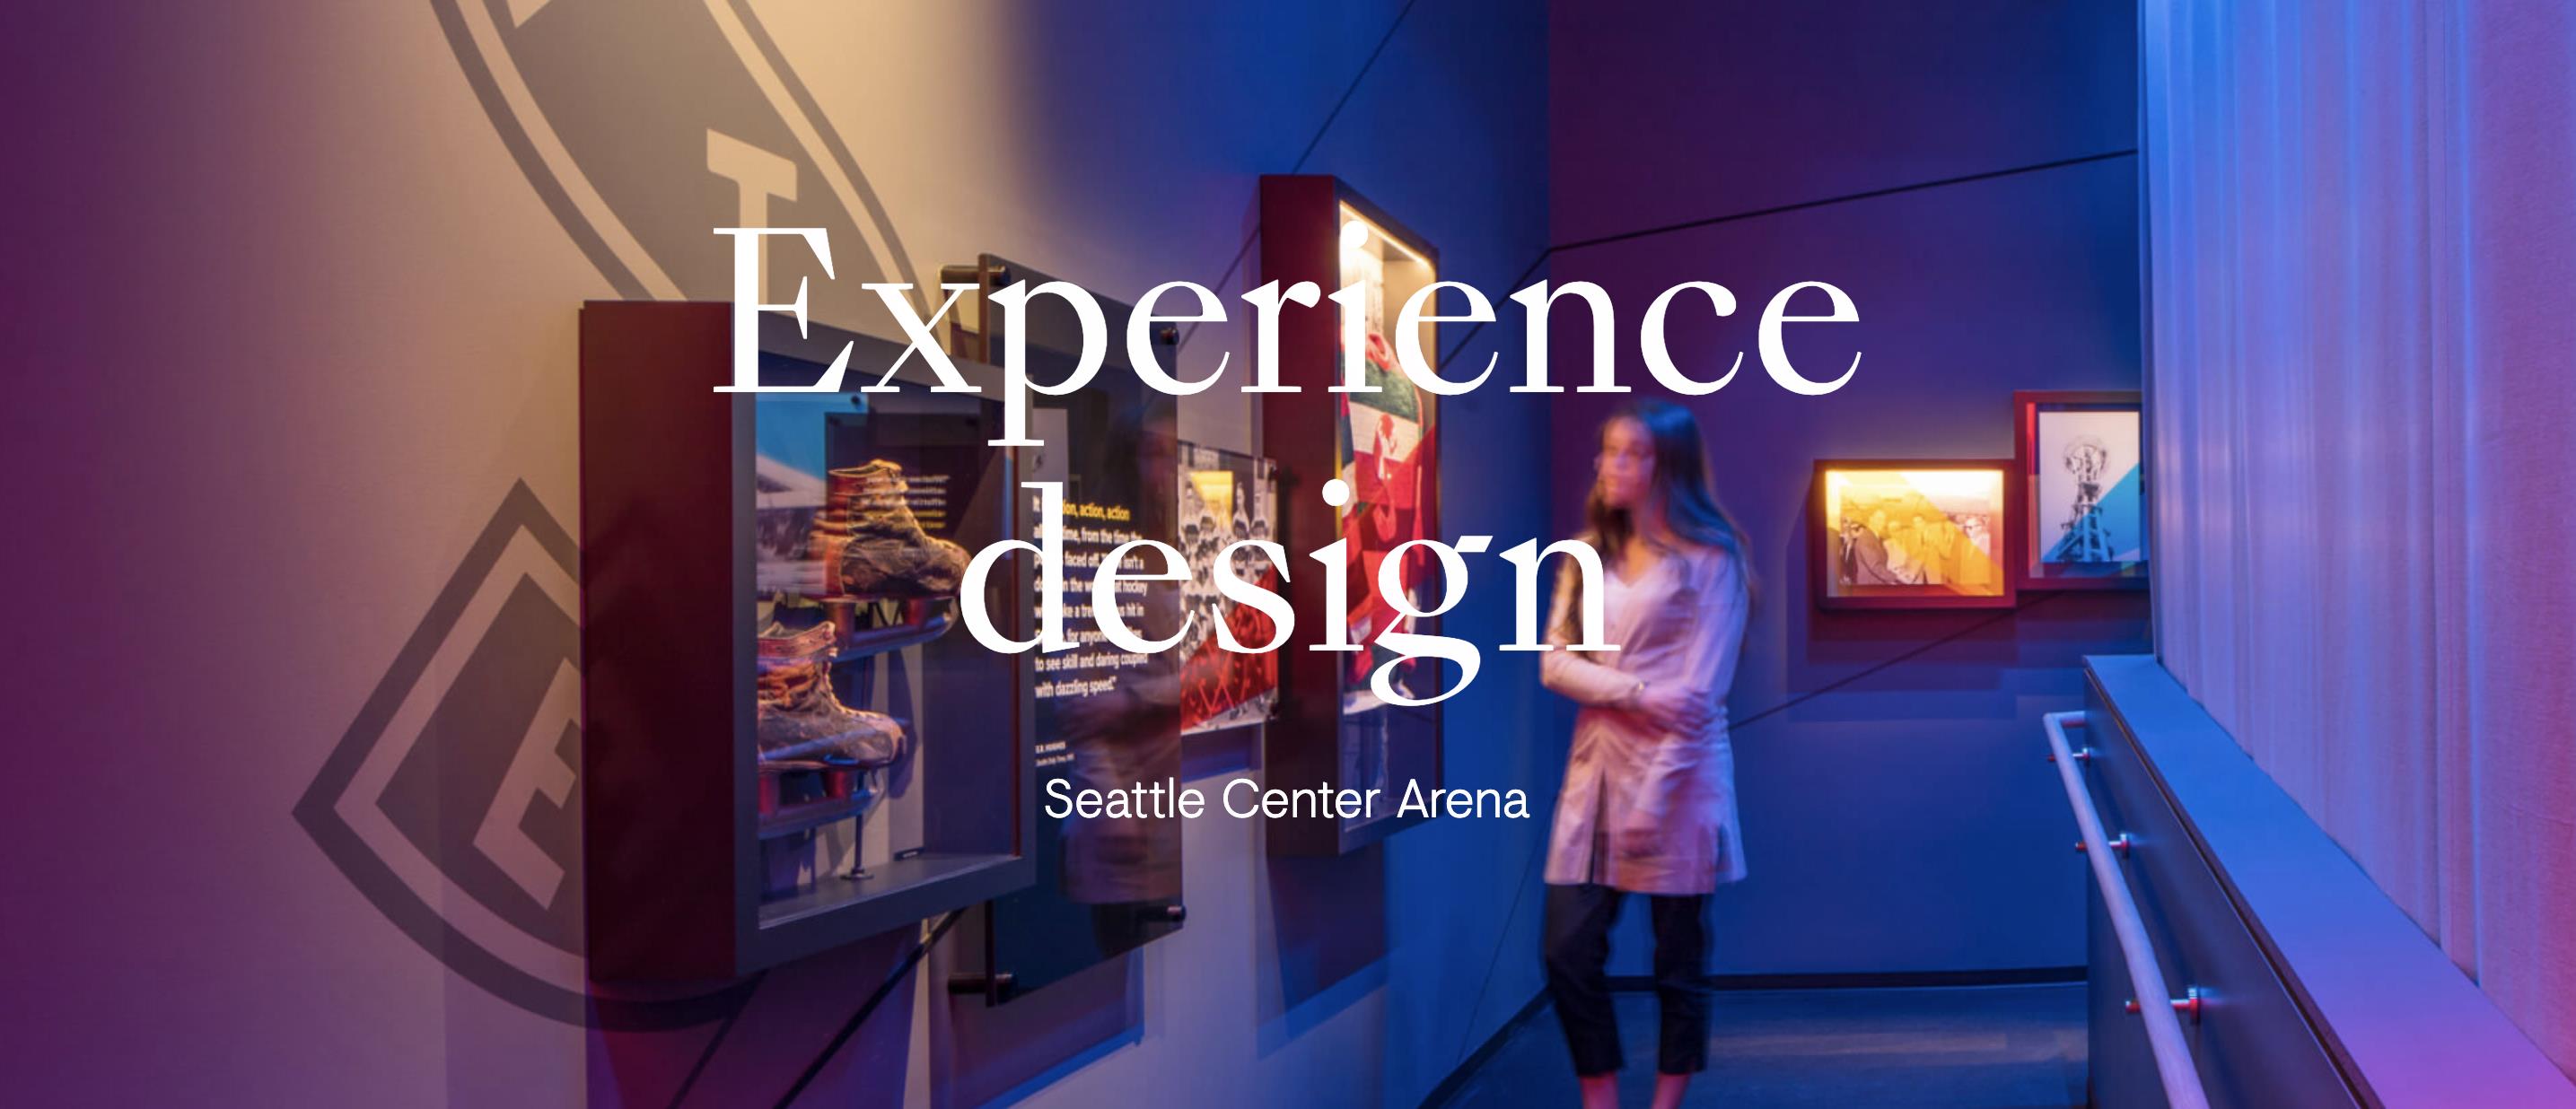 Seattle Center Arena Brand and Experience Design